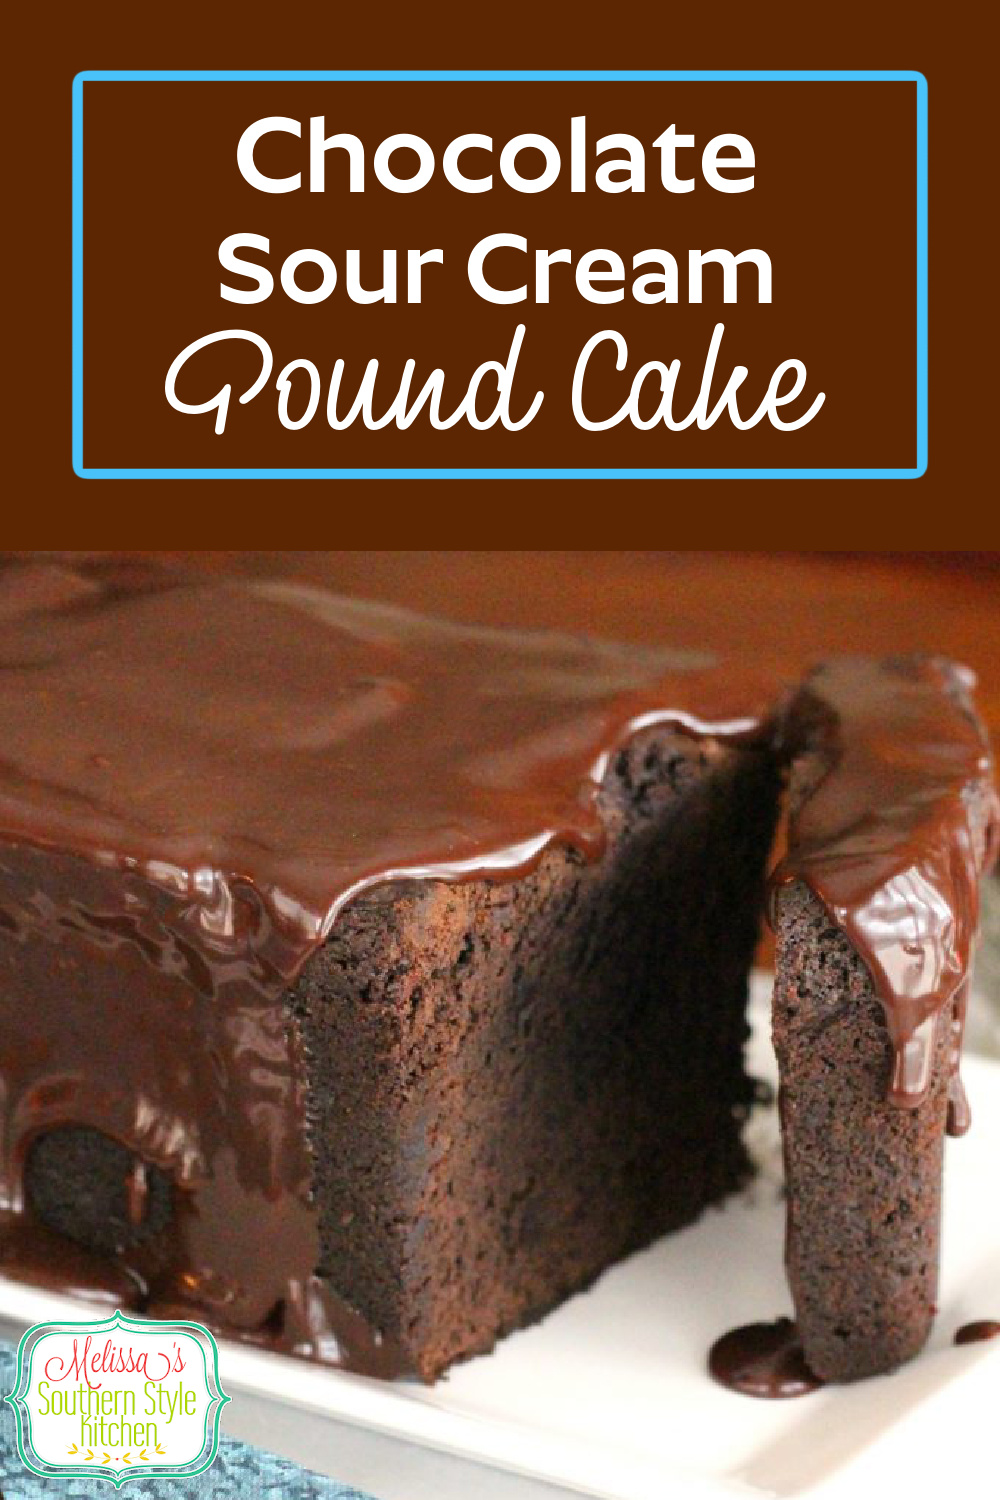 Chocolate fans will flip for this rich and decadent Chocolate Sour Cream Pound Cake #chocolatepoundcake #chocolatecake #chocolste #cakes #cakerecipes #southernpoundcakerecipes #desserts #holidaybaking #chocolterecipes #dessertfoodrecipes #christmascakes #thanksgiving #birthdaycake #southernfood #southernrecipes #poundcakes